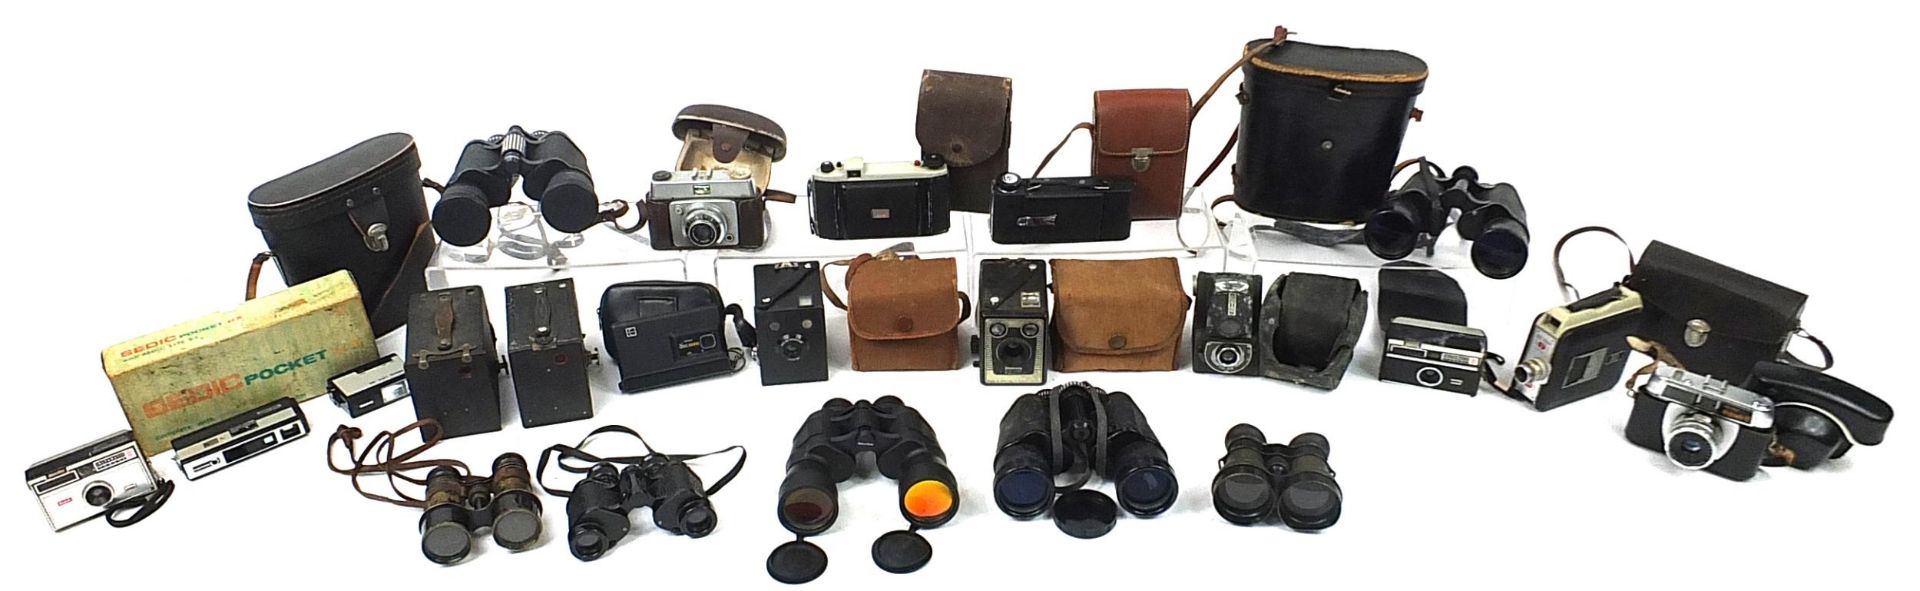 Vintage and later cameras and binoculars including Kodak and Barr & Stroud